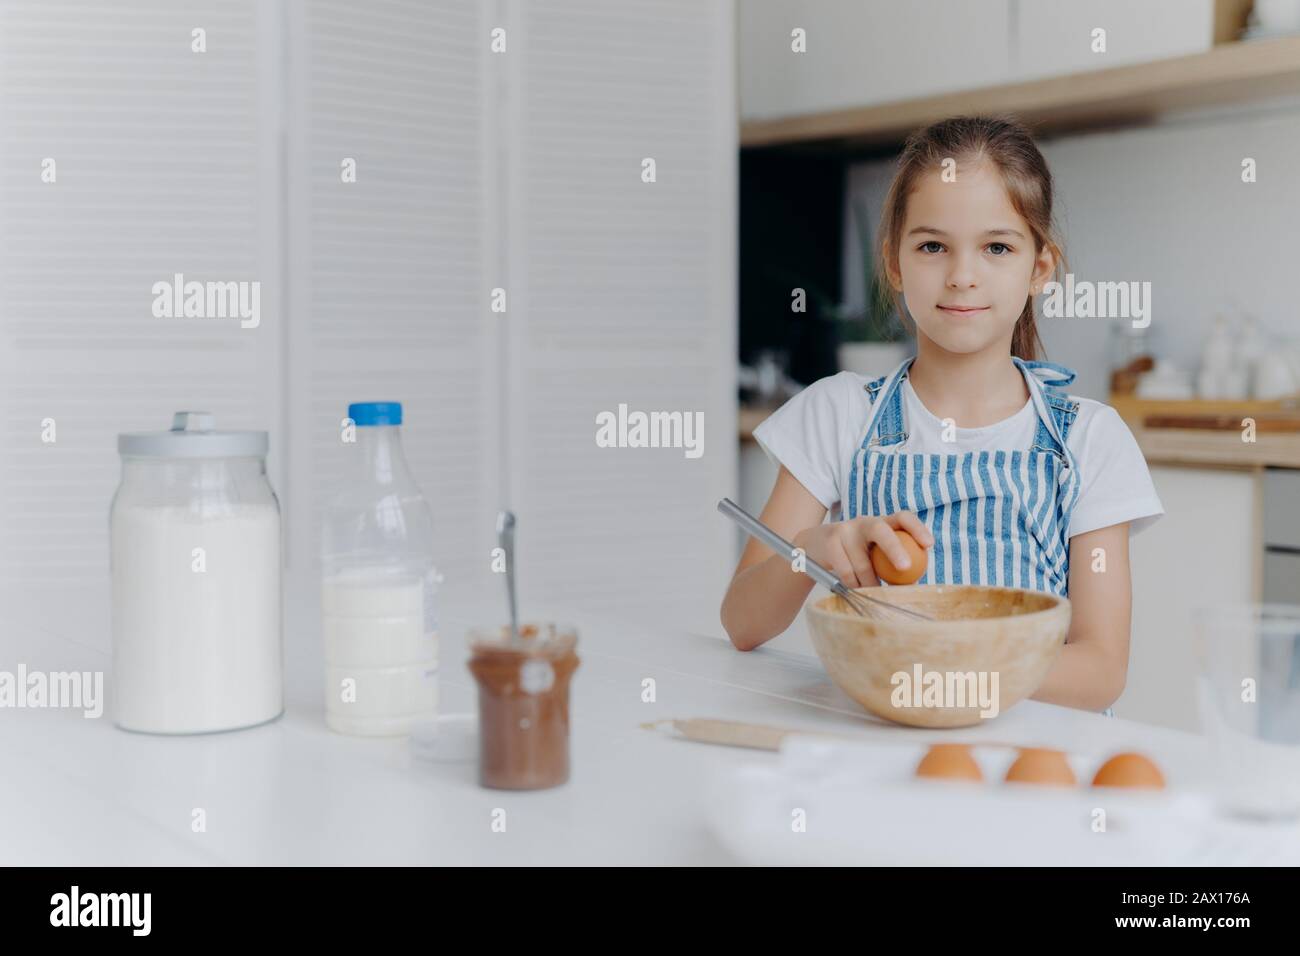 Adorable European child enjoys cooking activity, breaks egg in bowl, whisks ingredients, prepares tasty pastry, being young cook, wears apron, poses a Stock Photo